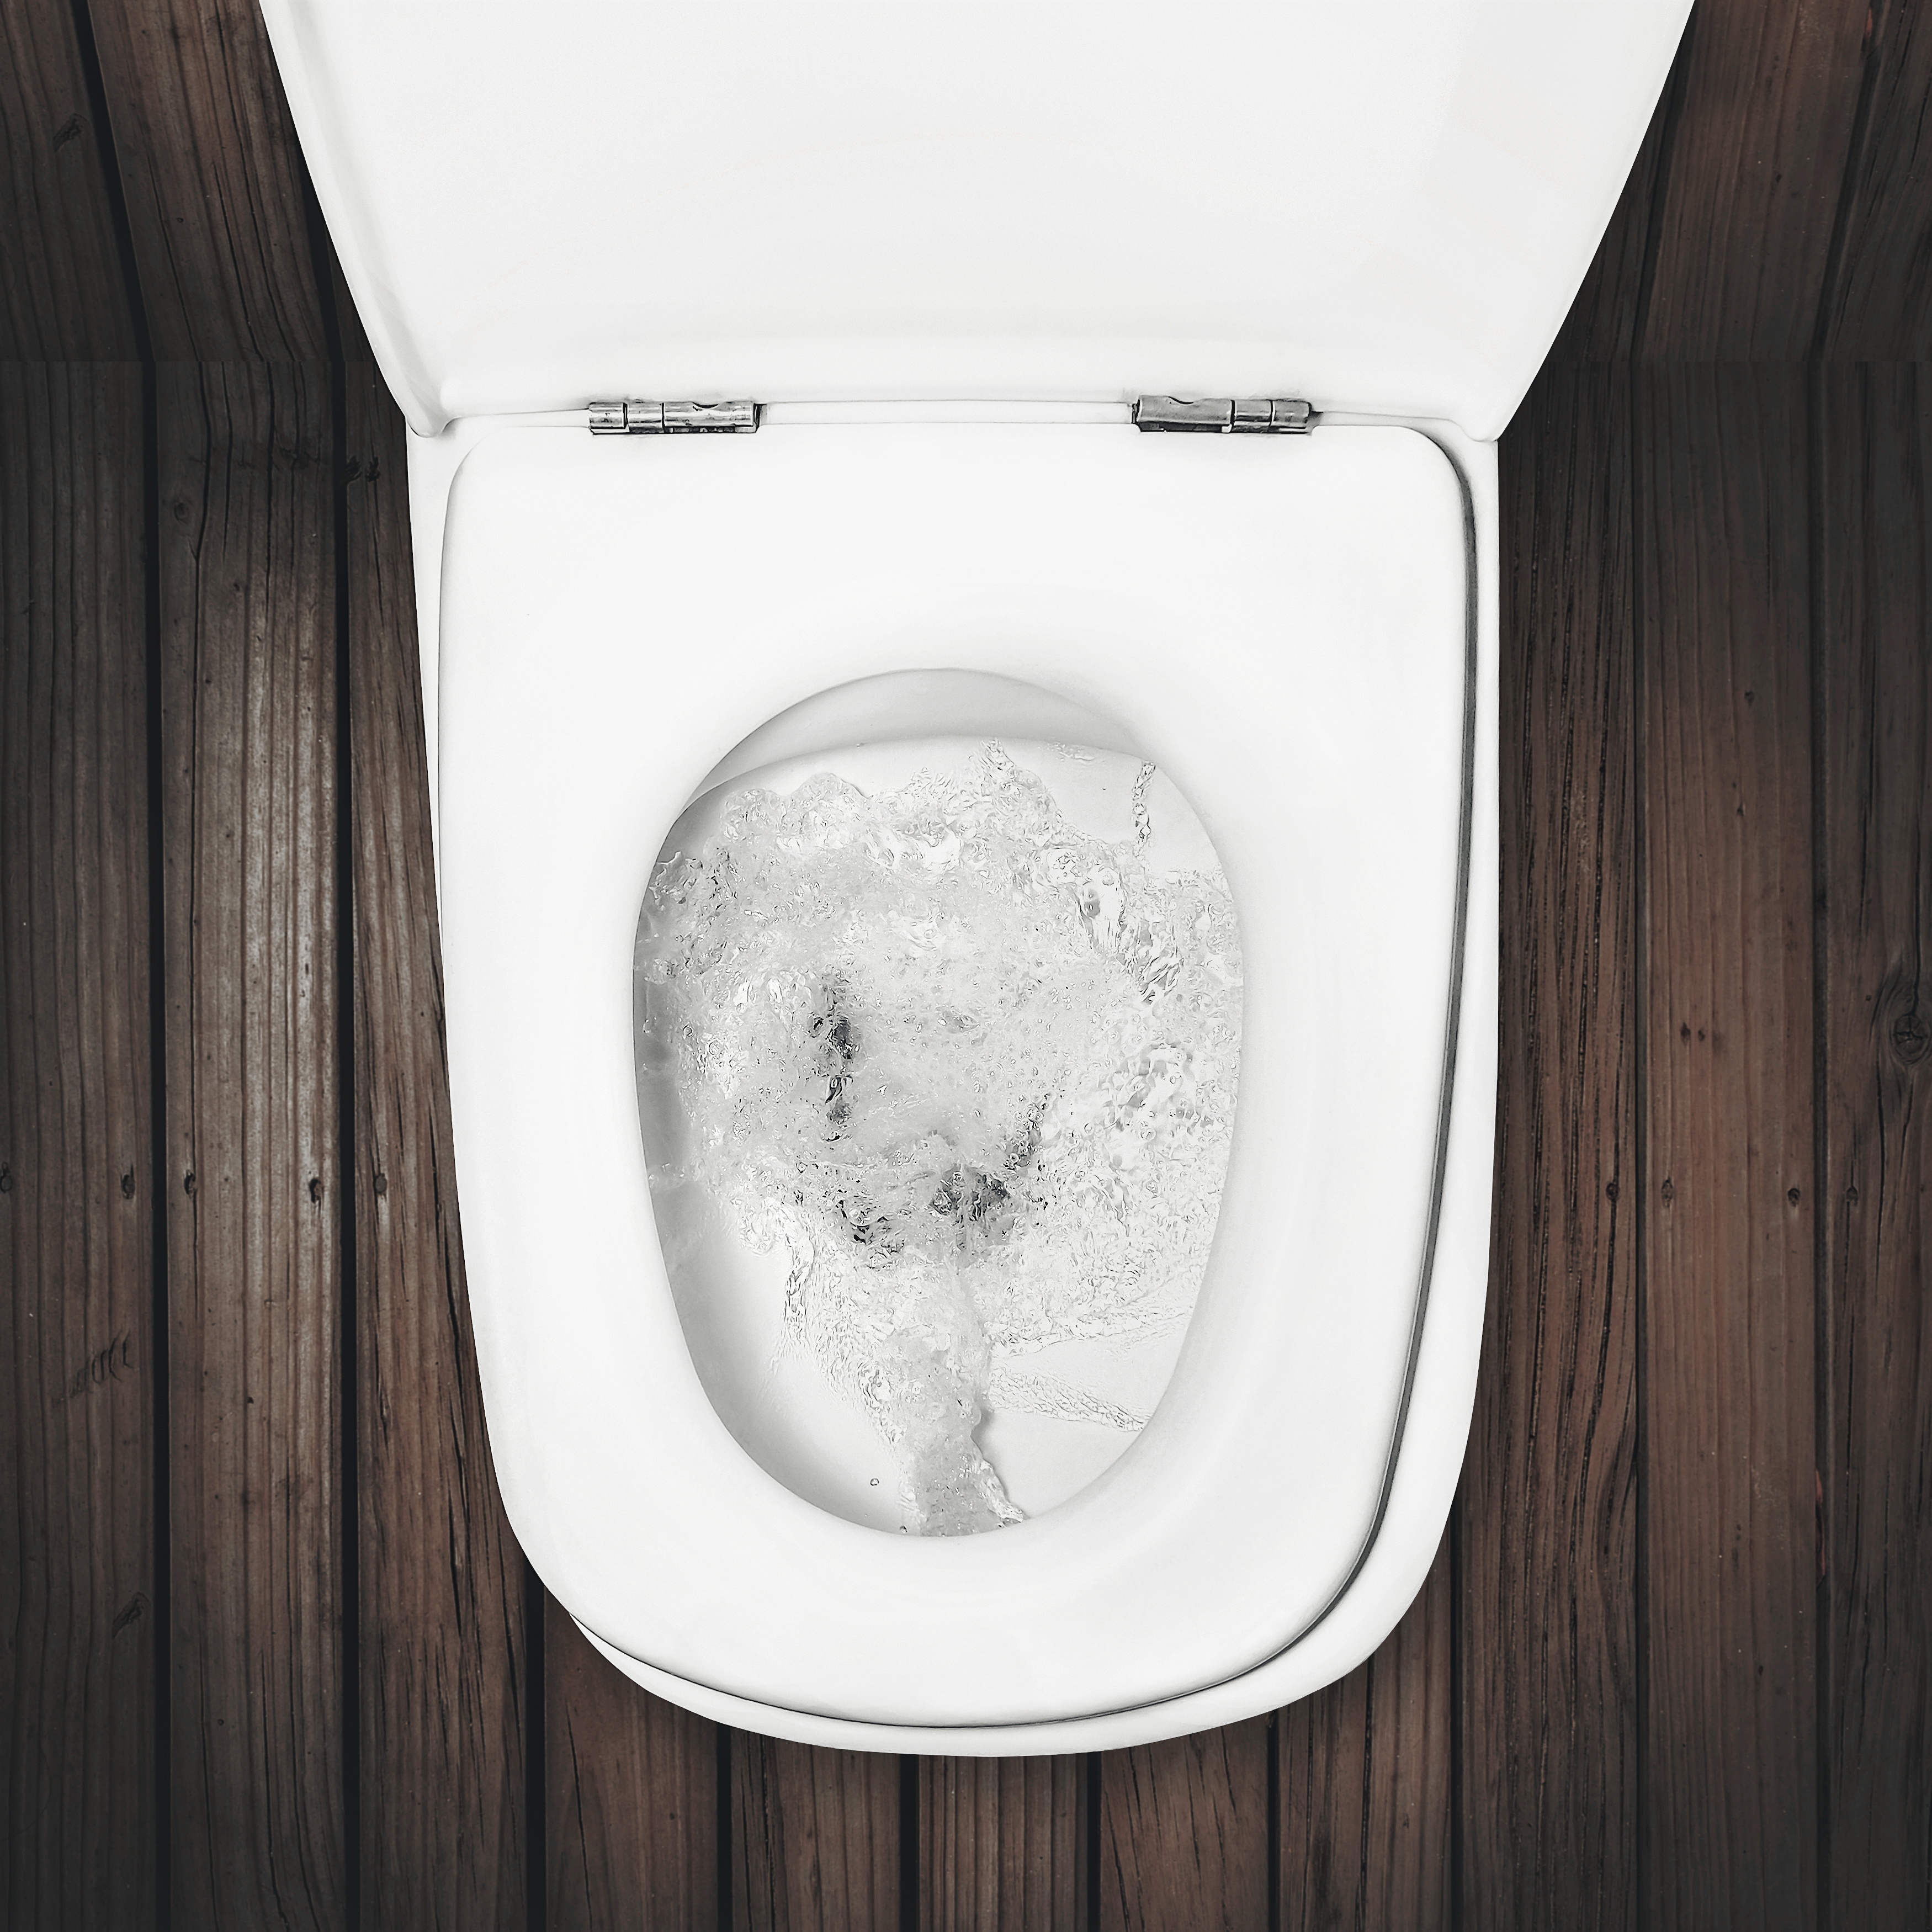 Unclogging Your Toilet the Natural Way